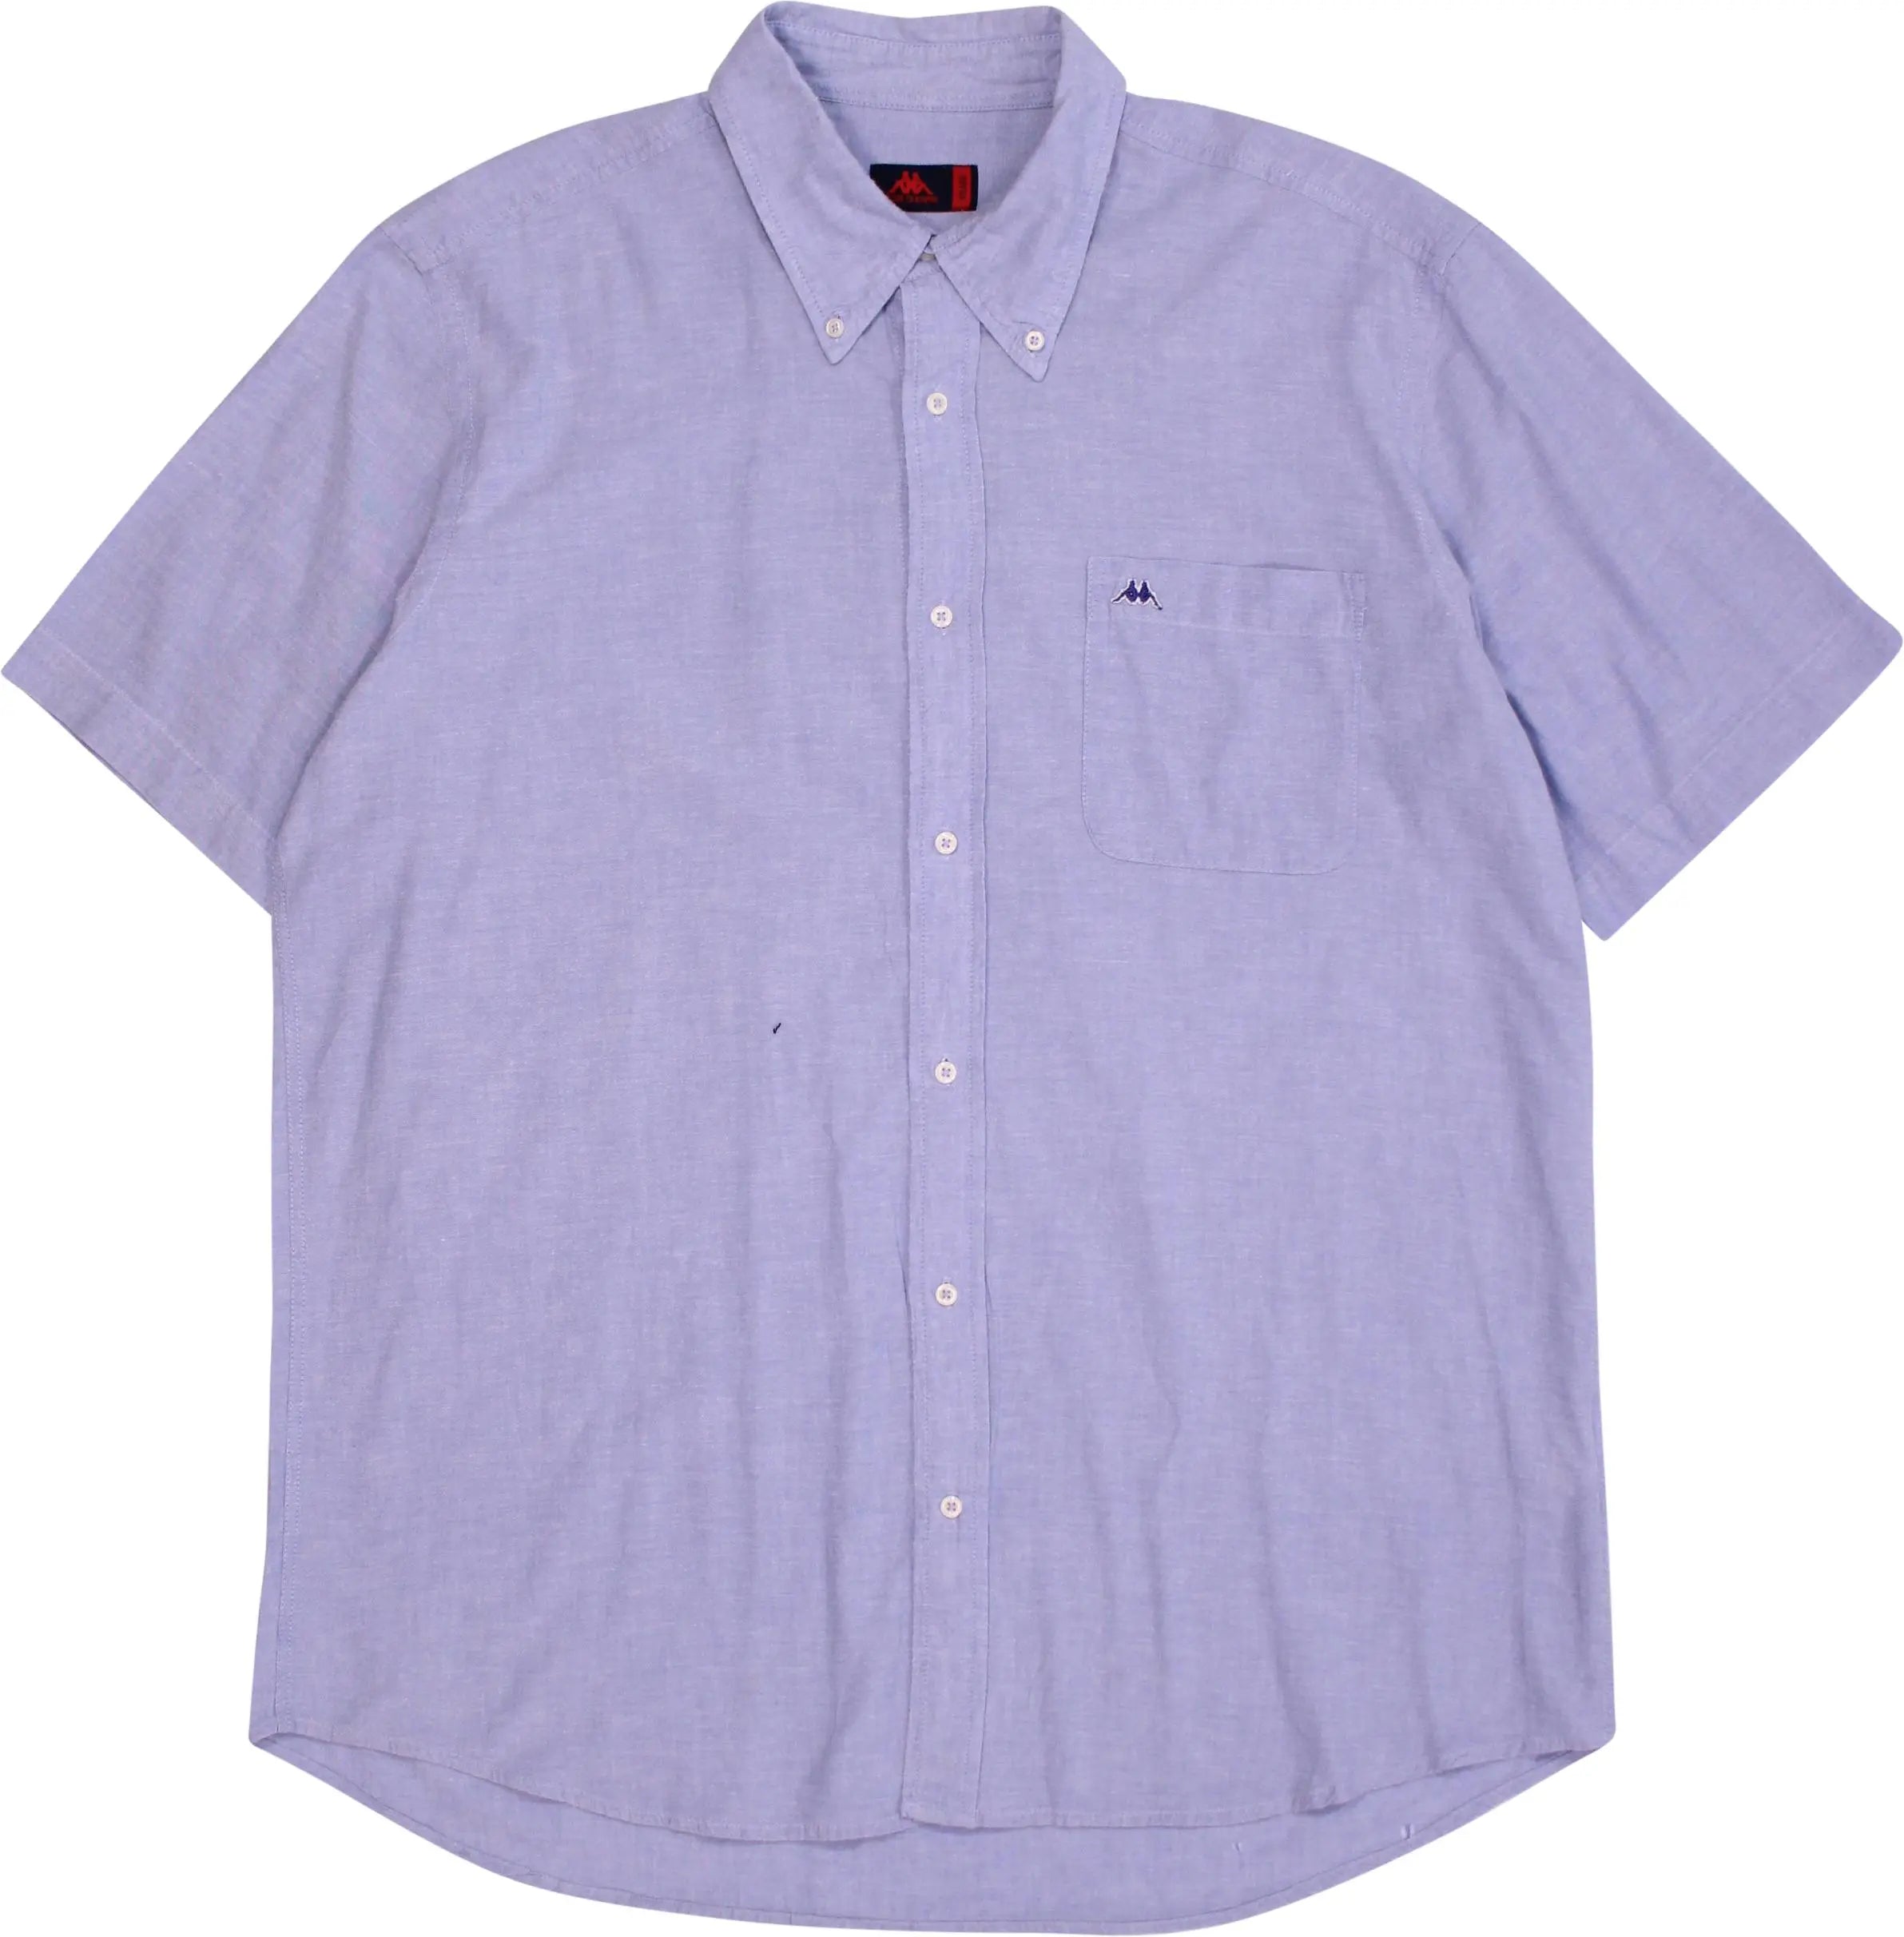 Kappa - Blue Short Sleeve Shirt by Kappa- ThriftTale.com - Vintage and second handclothing